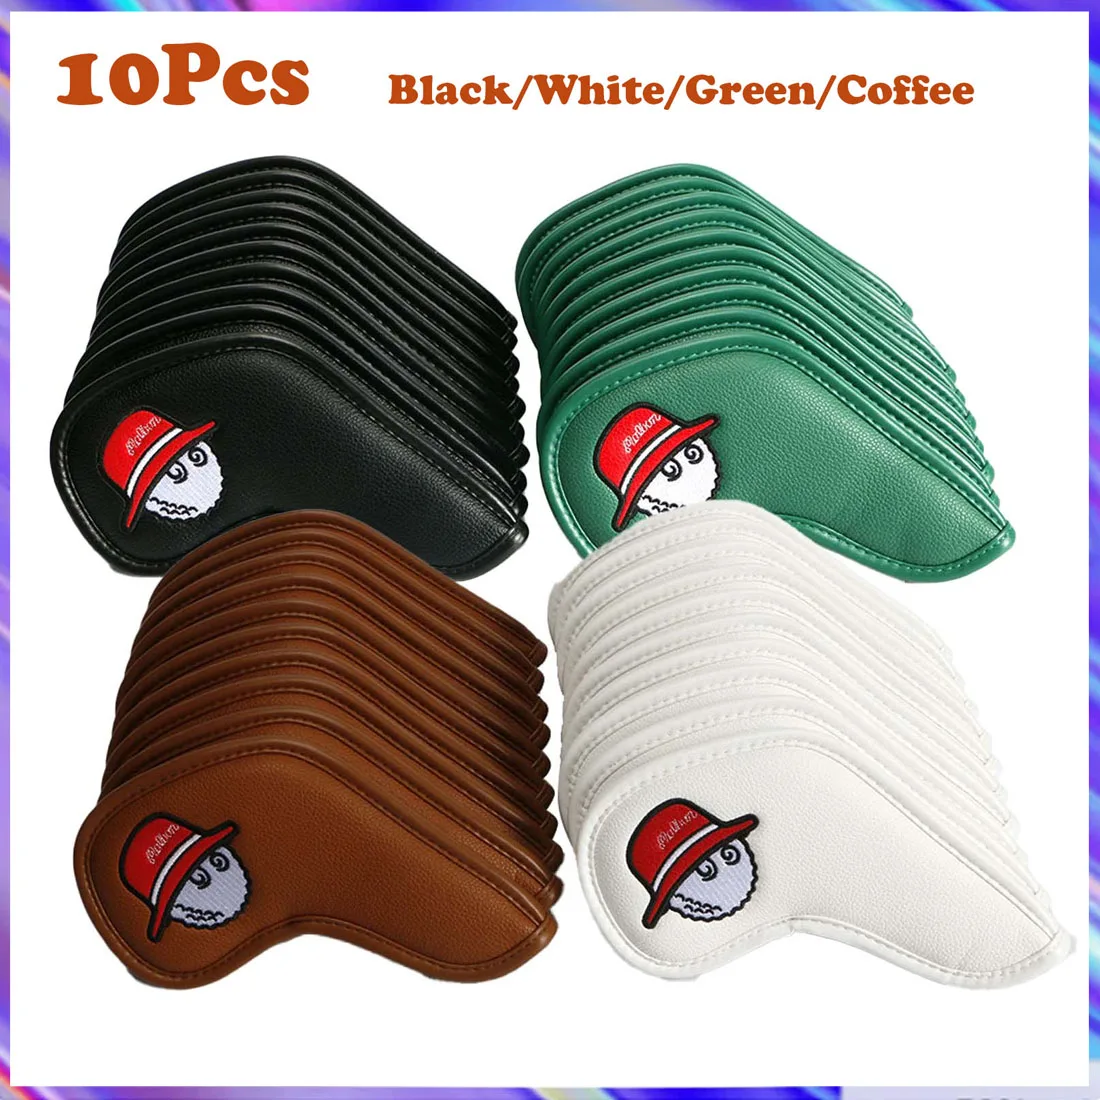 10Pcs Golf Iron Head Cover Golf Cap PU Leather Club Head Cover Golf Head Protection Sleeve Wedge Cover Golf Accessories Supplies